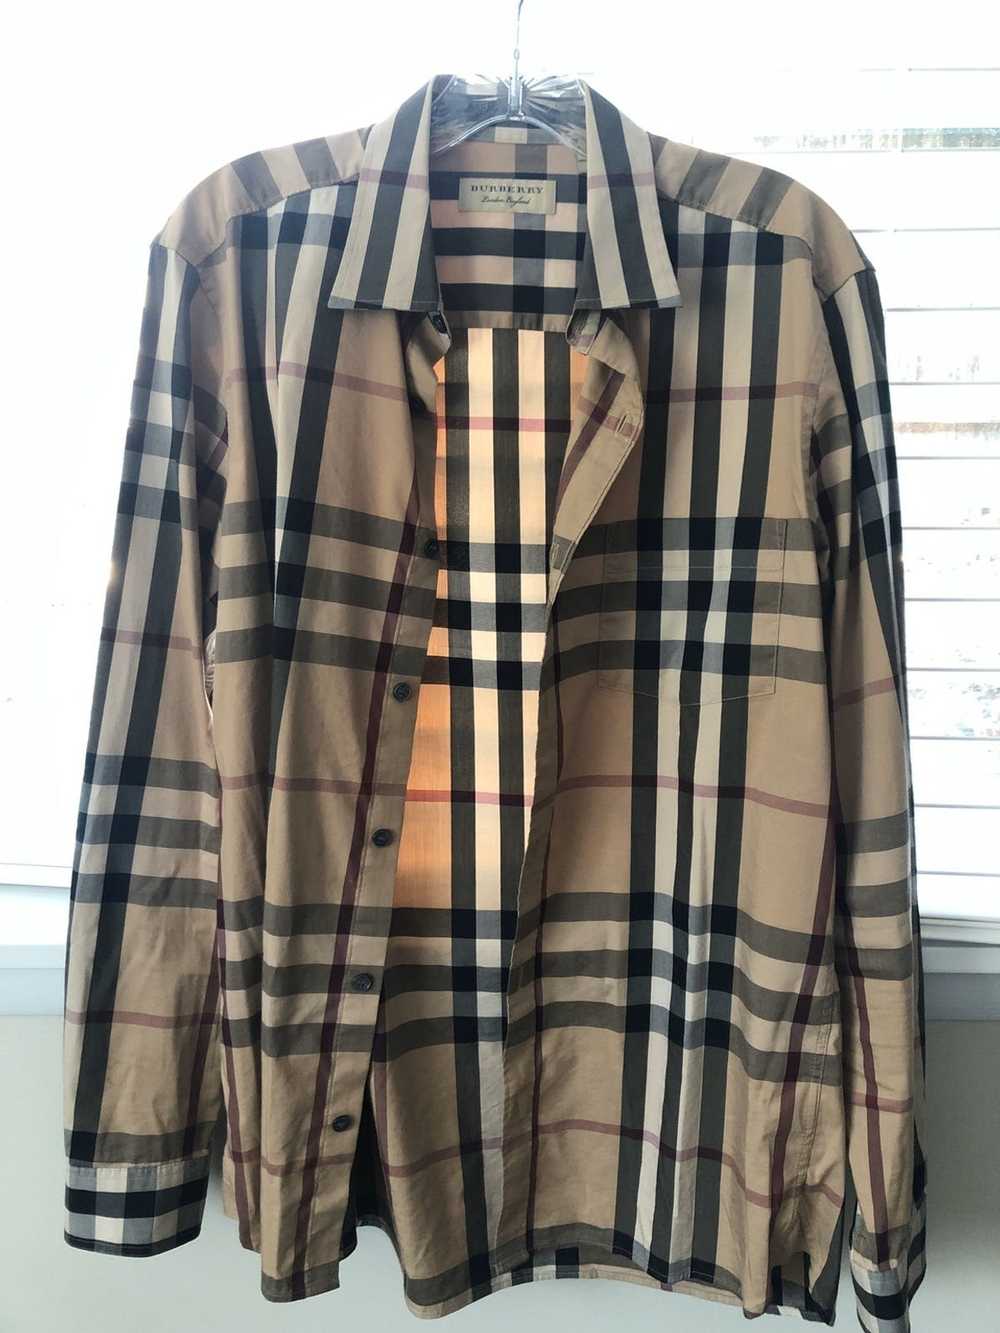 Burberry Burberry LongSleeve Button Up - image 1